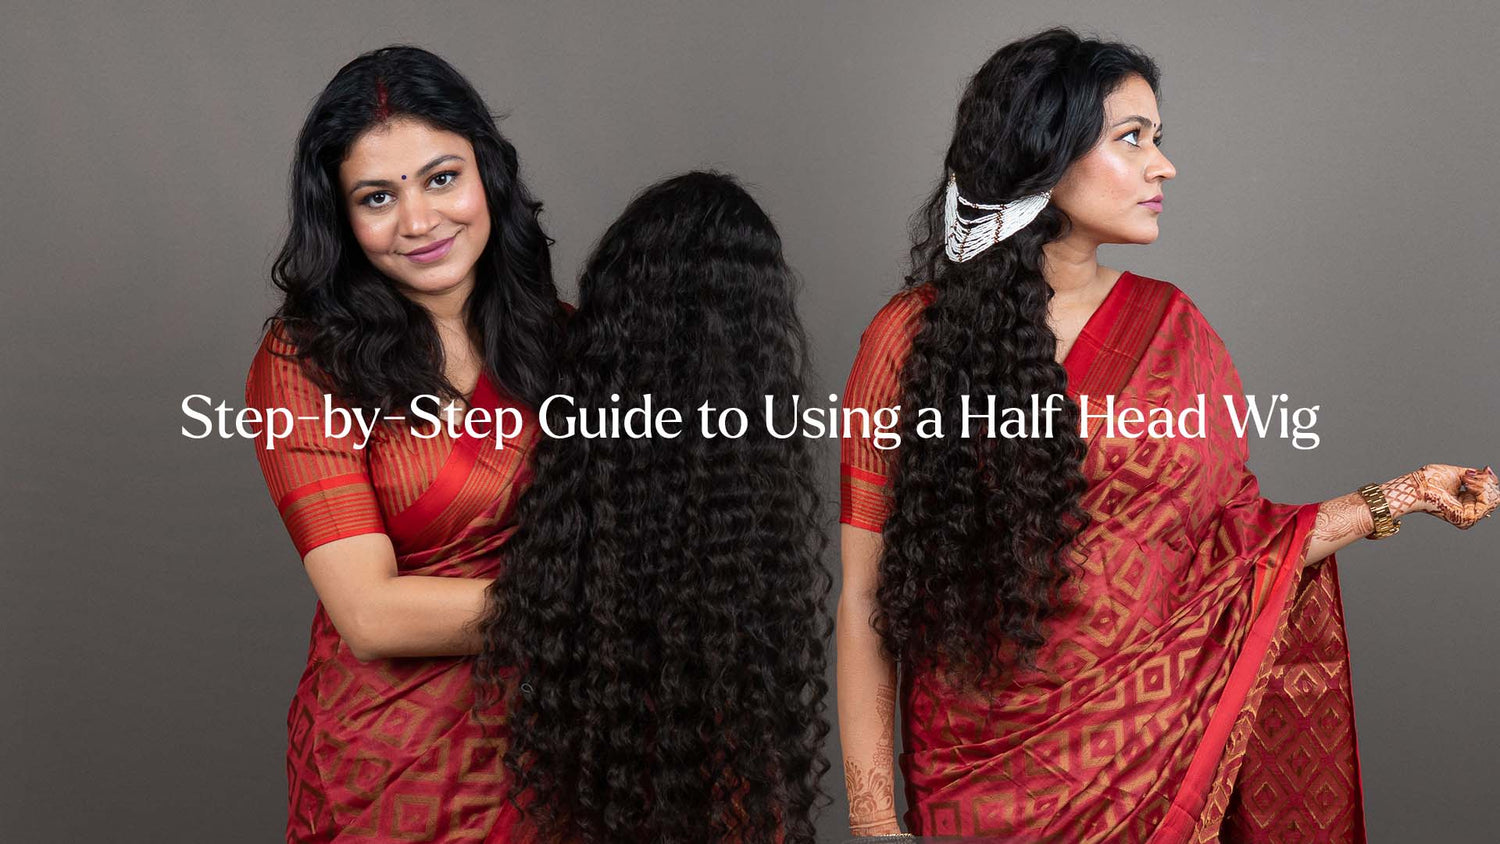 Step-by-Step Guide to Using a Half Head Wig: Achieve Effortlessly Beautiful Hair